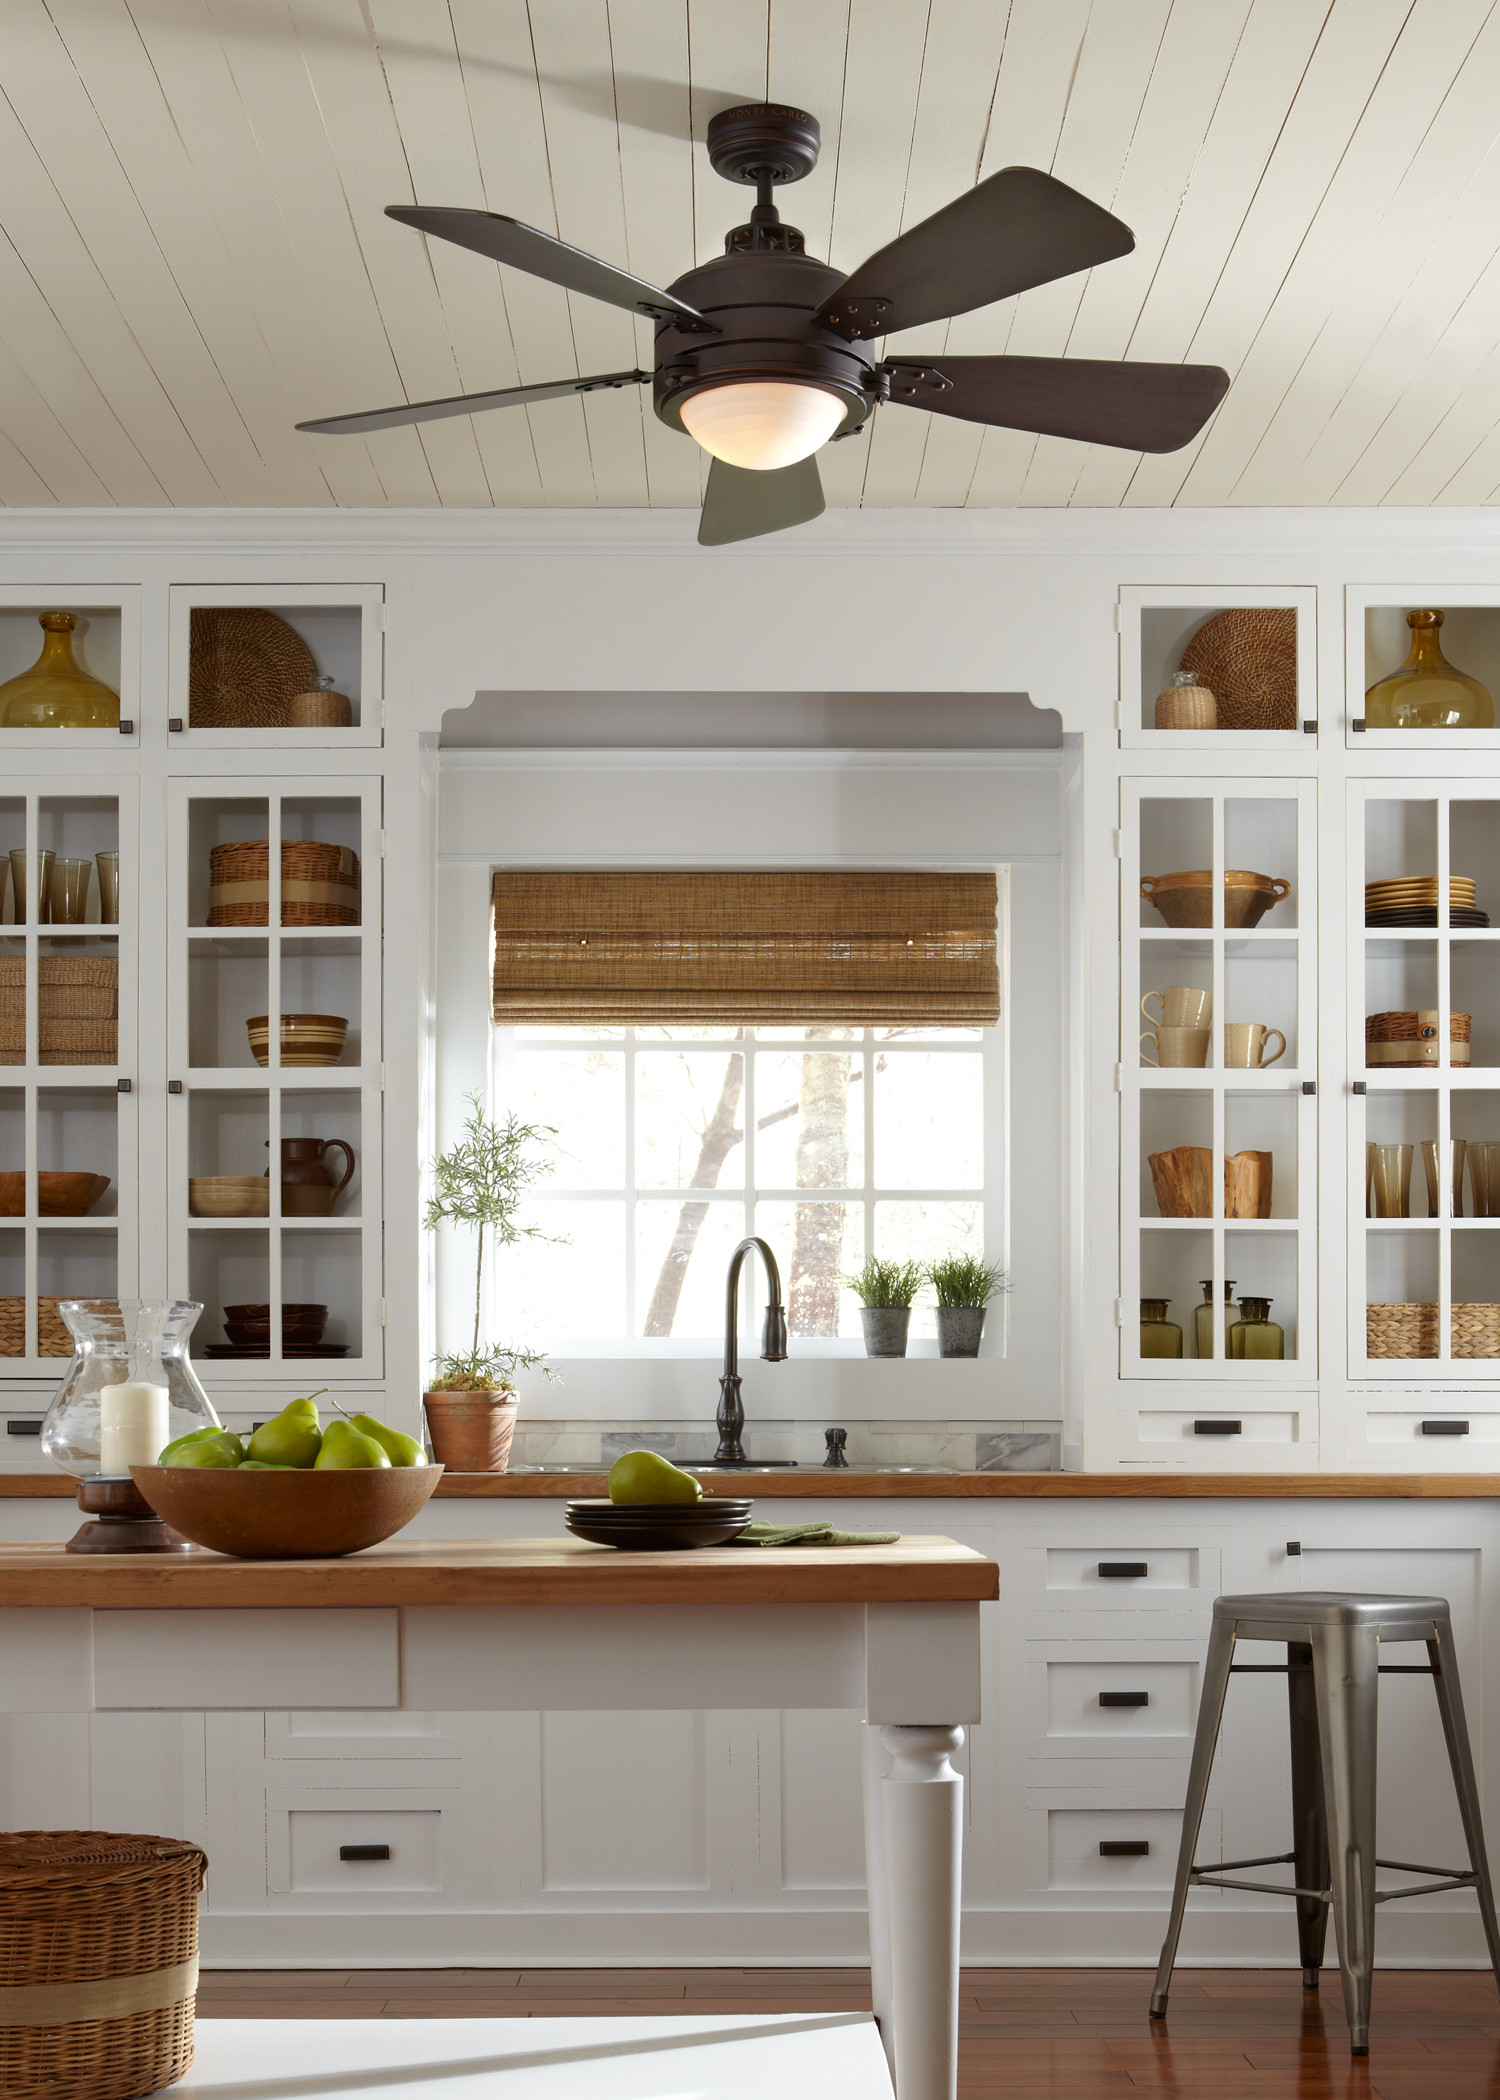 Kitchen Ceiling Fan With Light
 10 Tips To Help You Get the Right Ceiling fan for kitchen